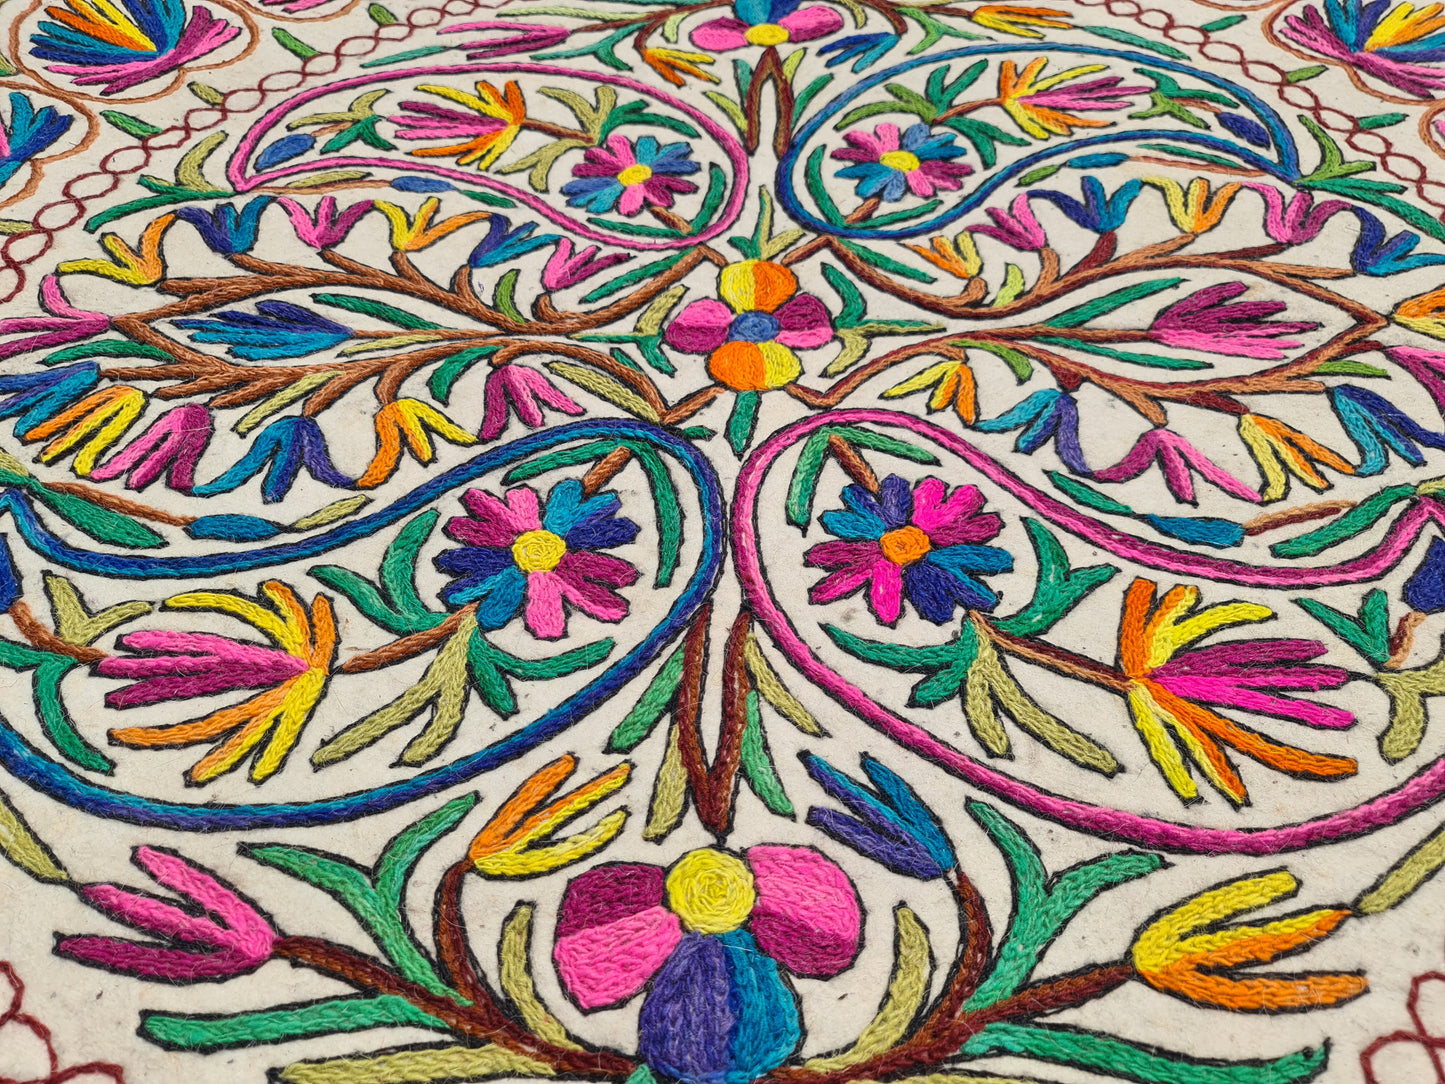 Hand-Felted 7x5 Wool Rug "Namda" from Kashmir - Unique Floral Embroidery on Sheep Wool Felt Base - Boho Decor for Cozy Floors and Artful Corners